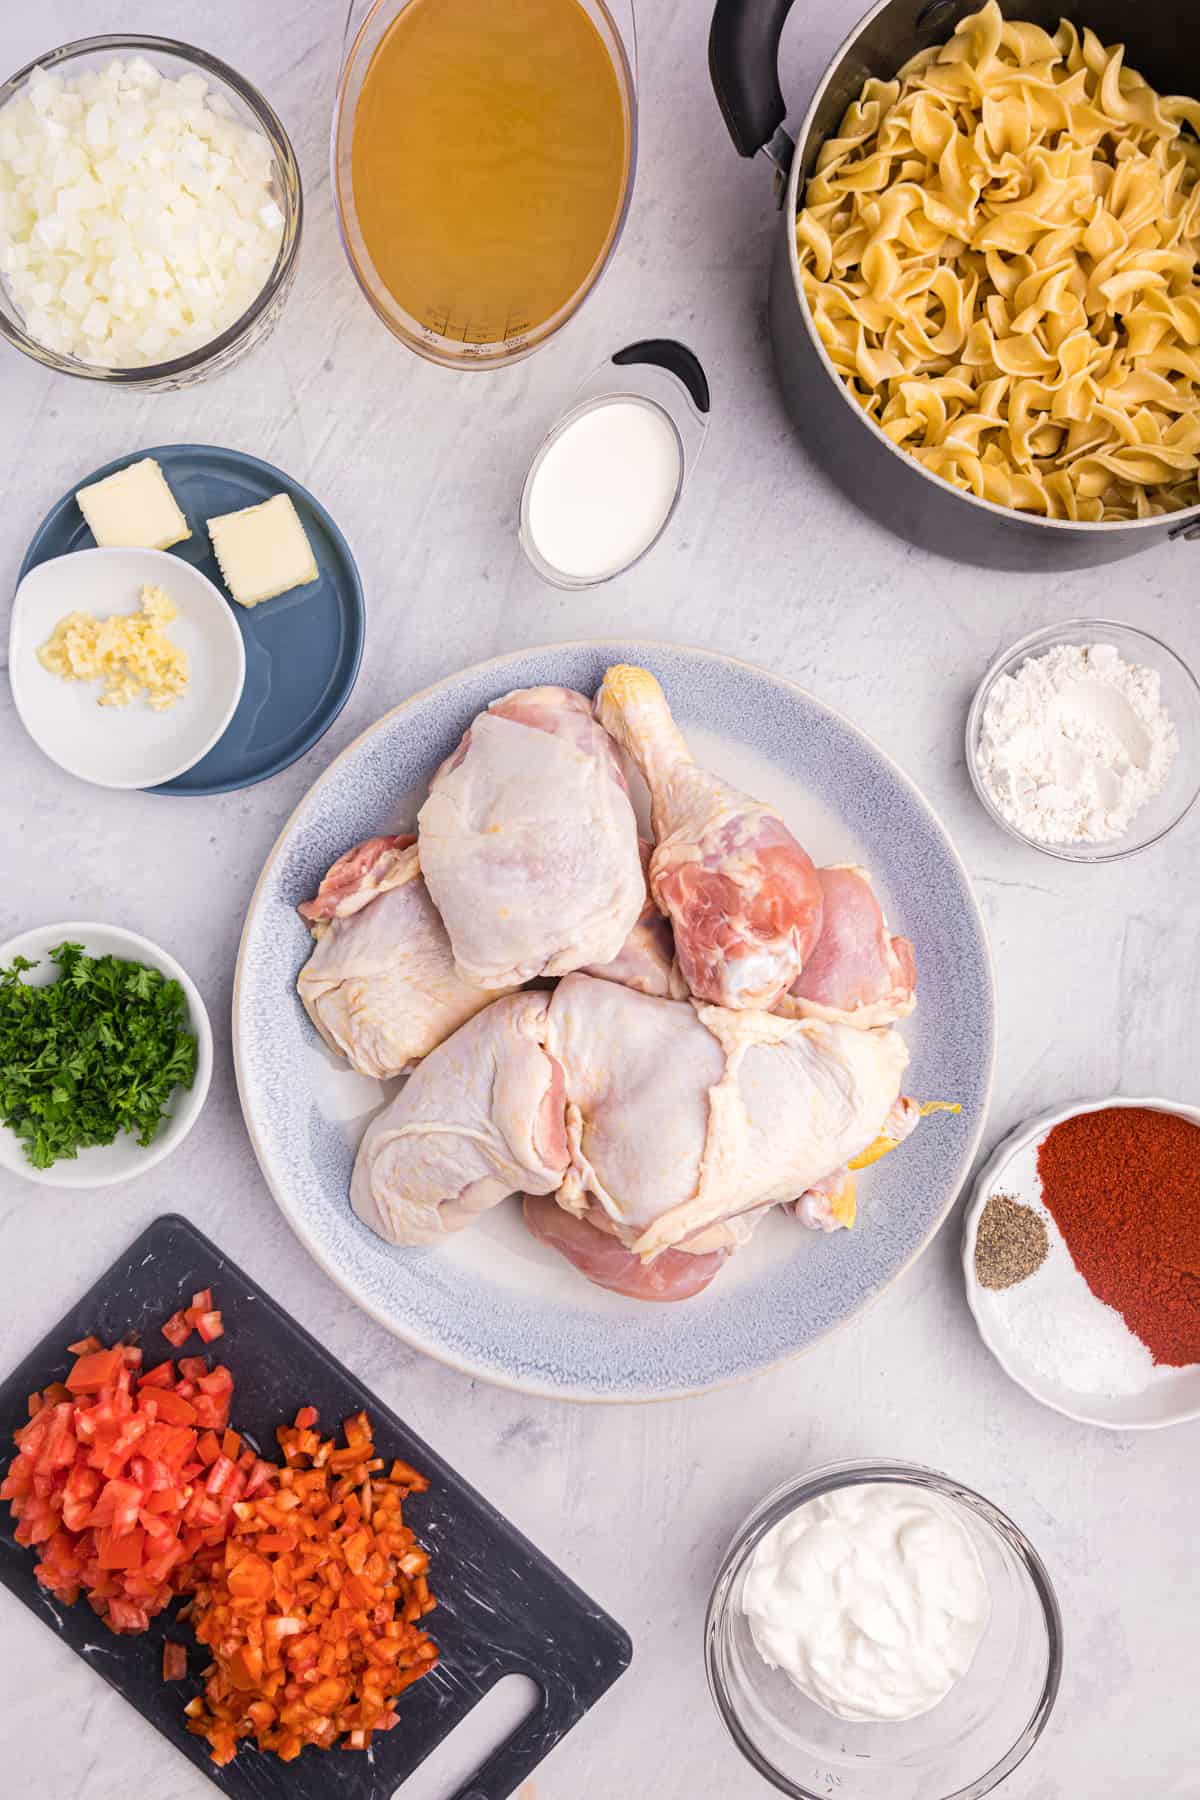 The ingredients for chicken paprikash are placed on a white surface.